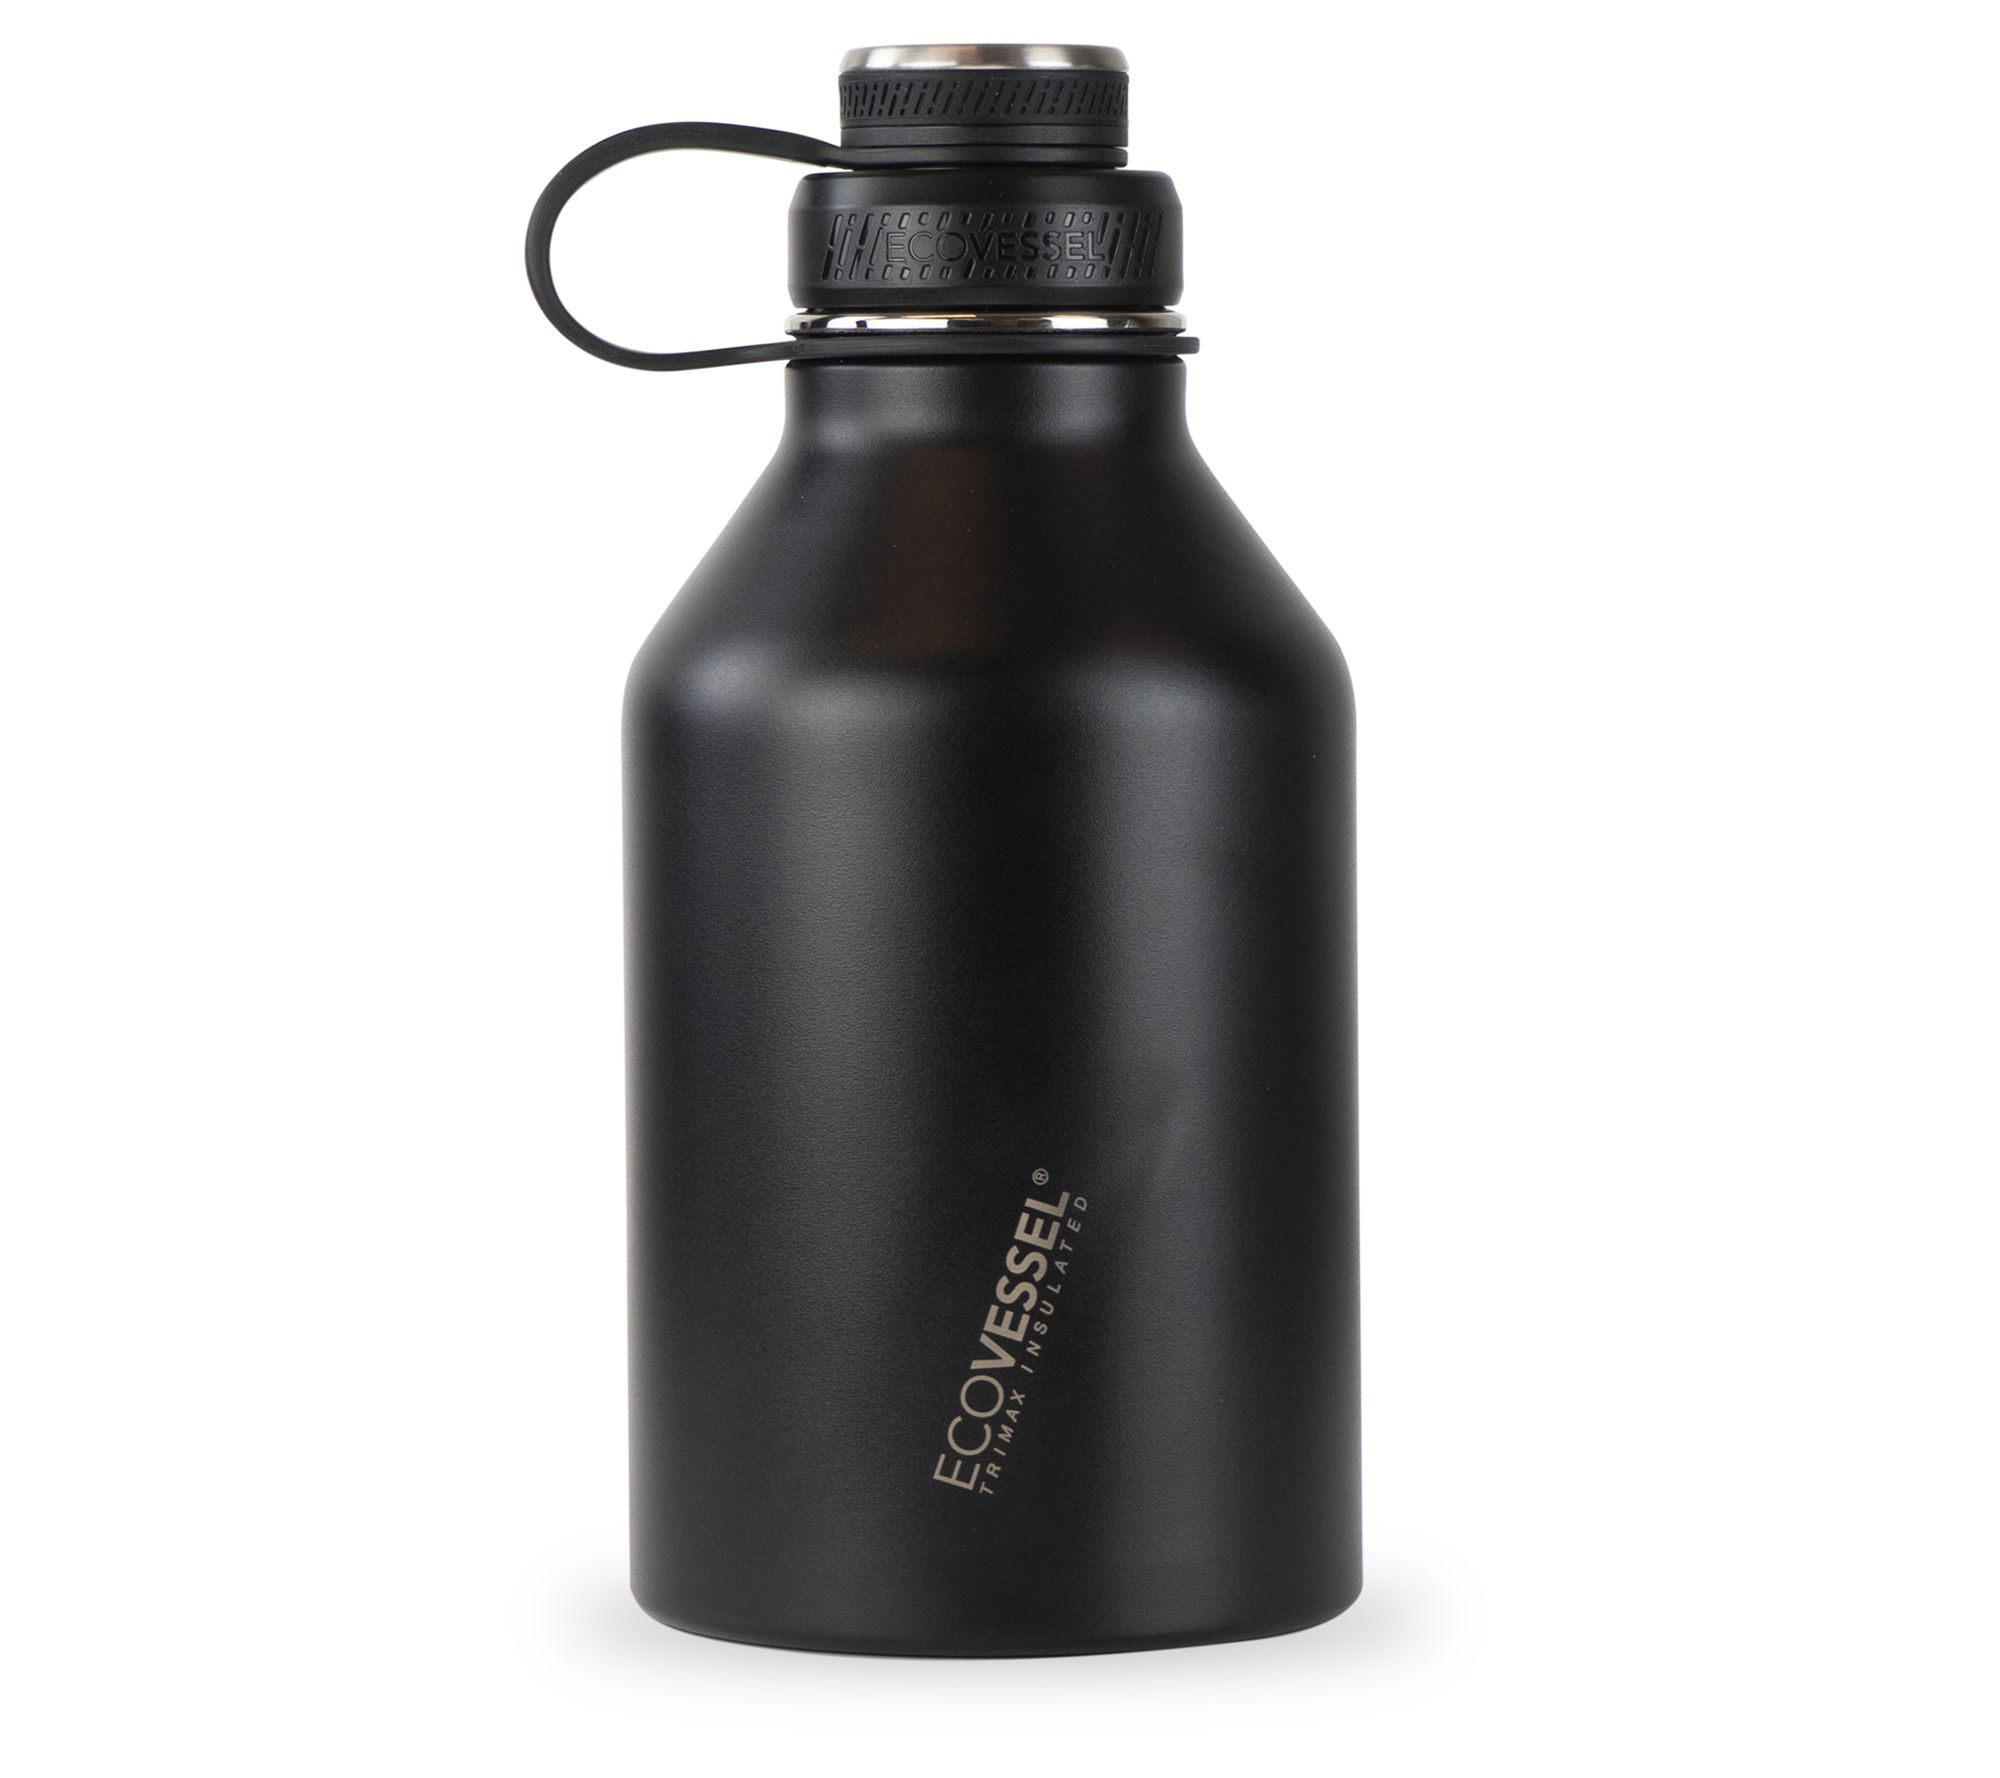 Visit Limited Edition: Cream 22oz. Stainless Steel Bottle & Lid